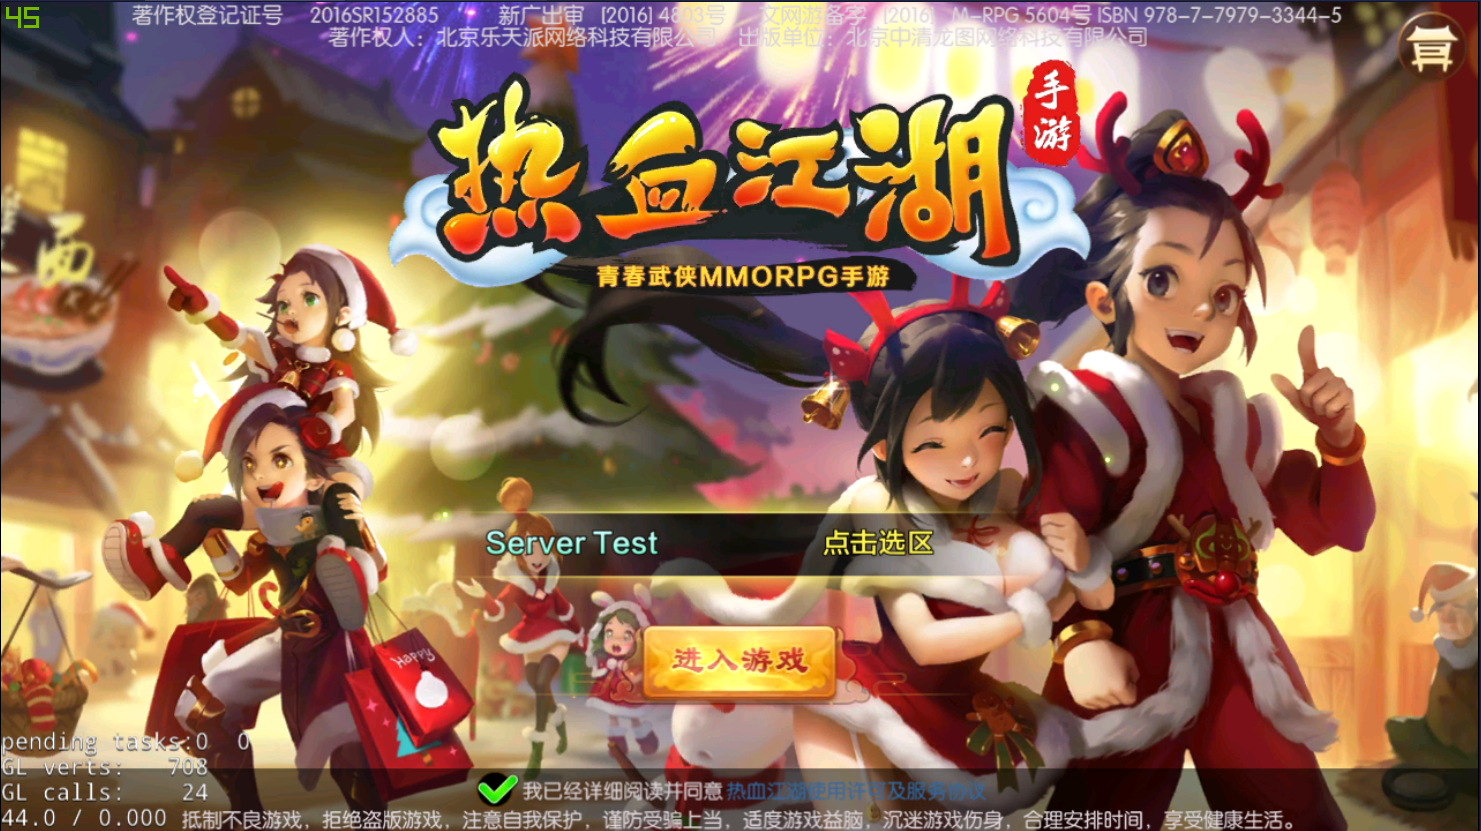 rUhS7zr - [Release] Yulgang/Scions of Fate Mobile - RaGEZONE Forums